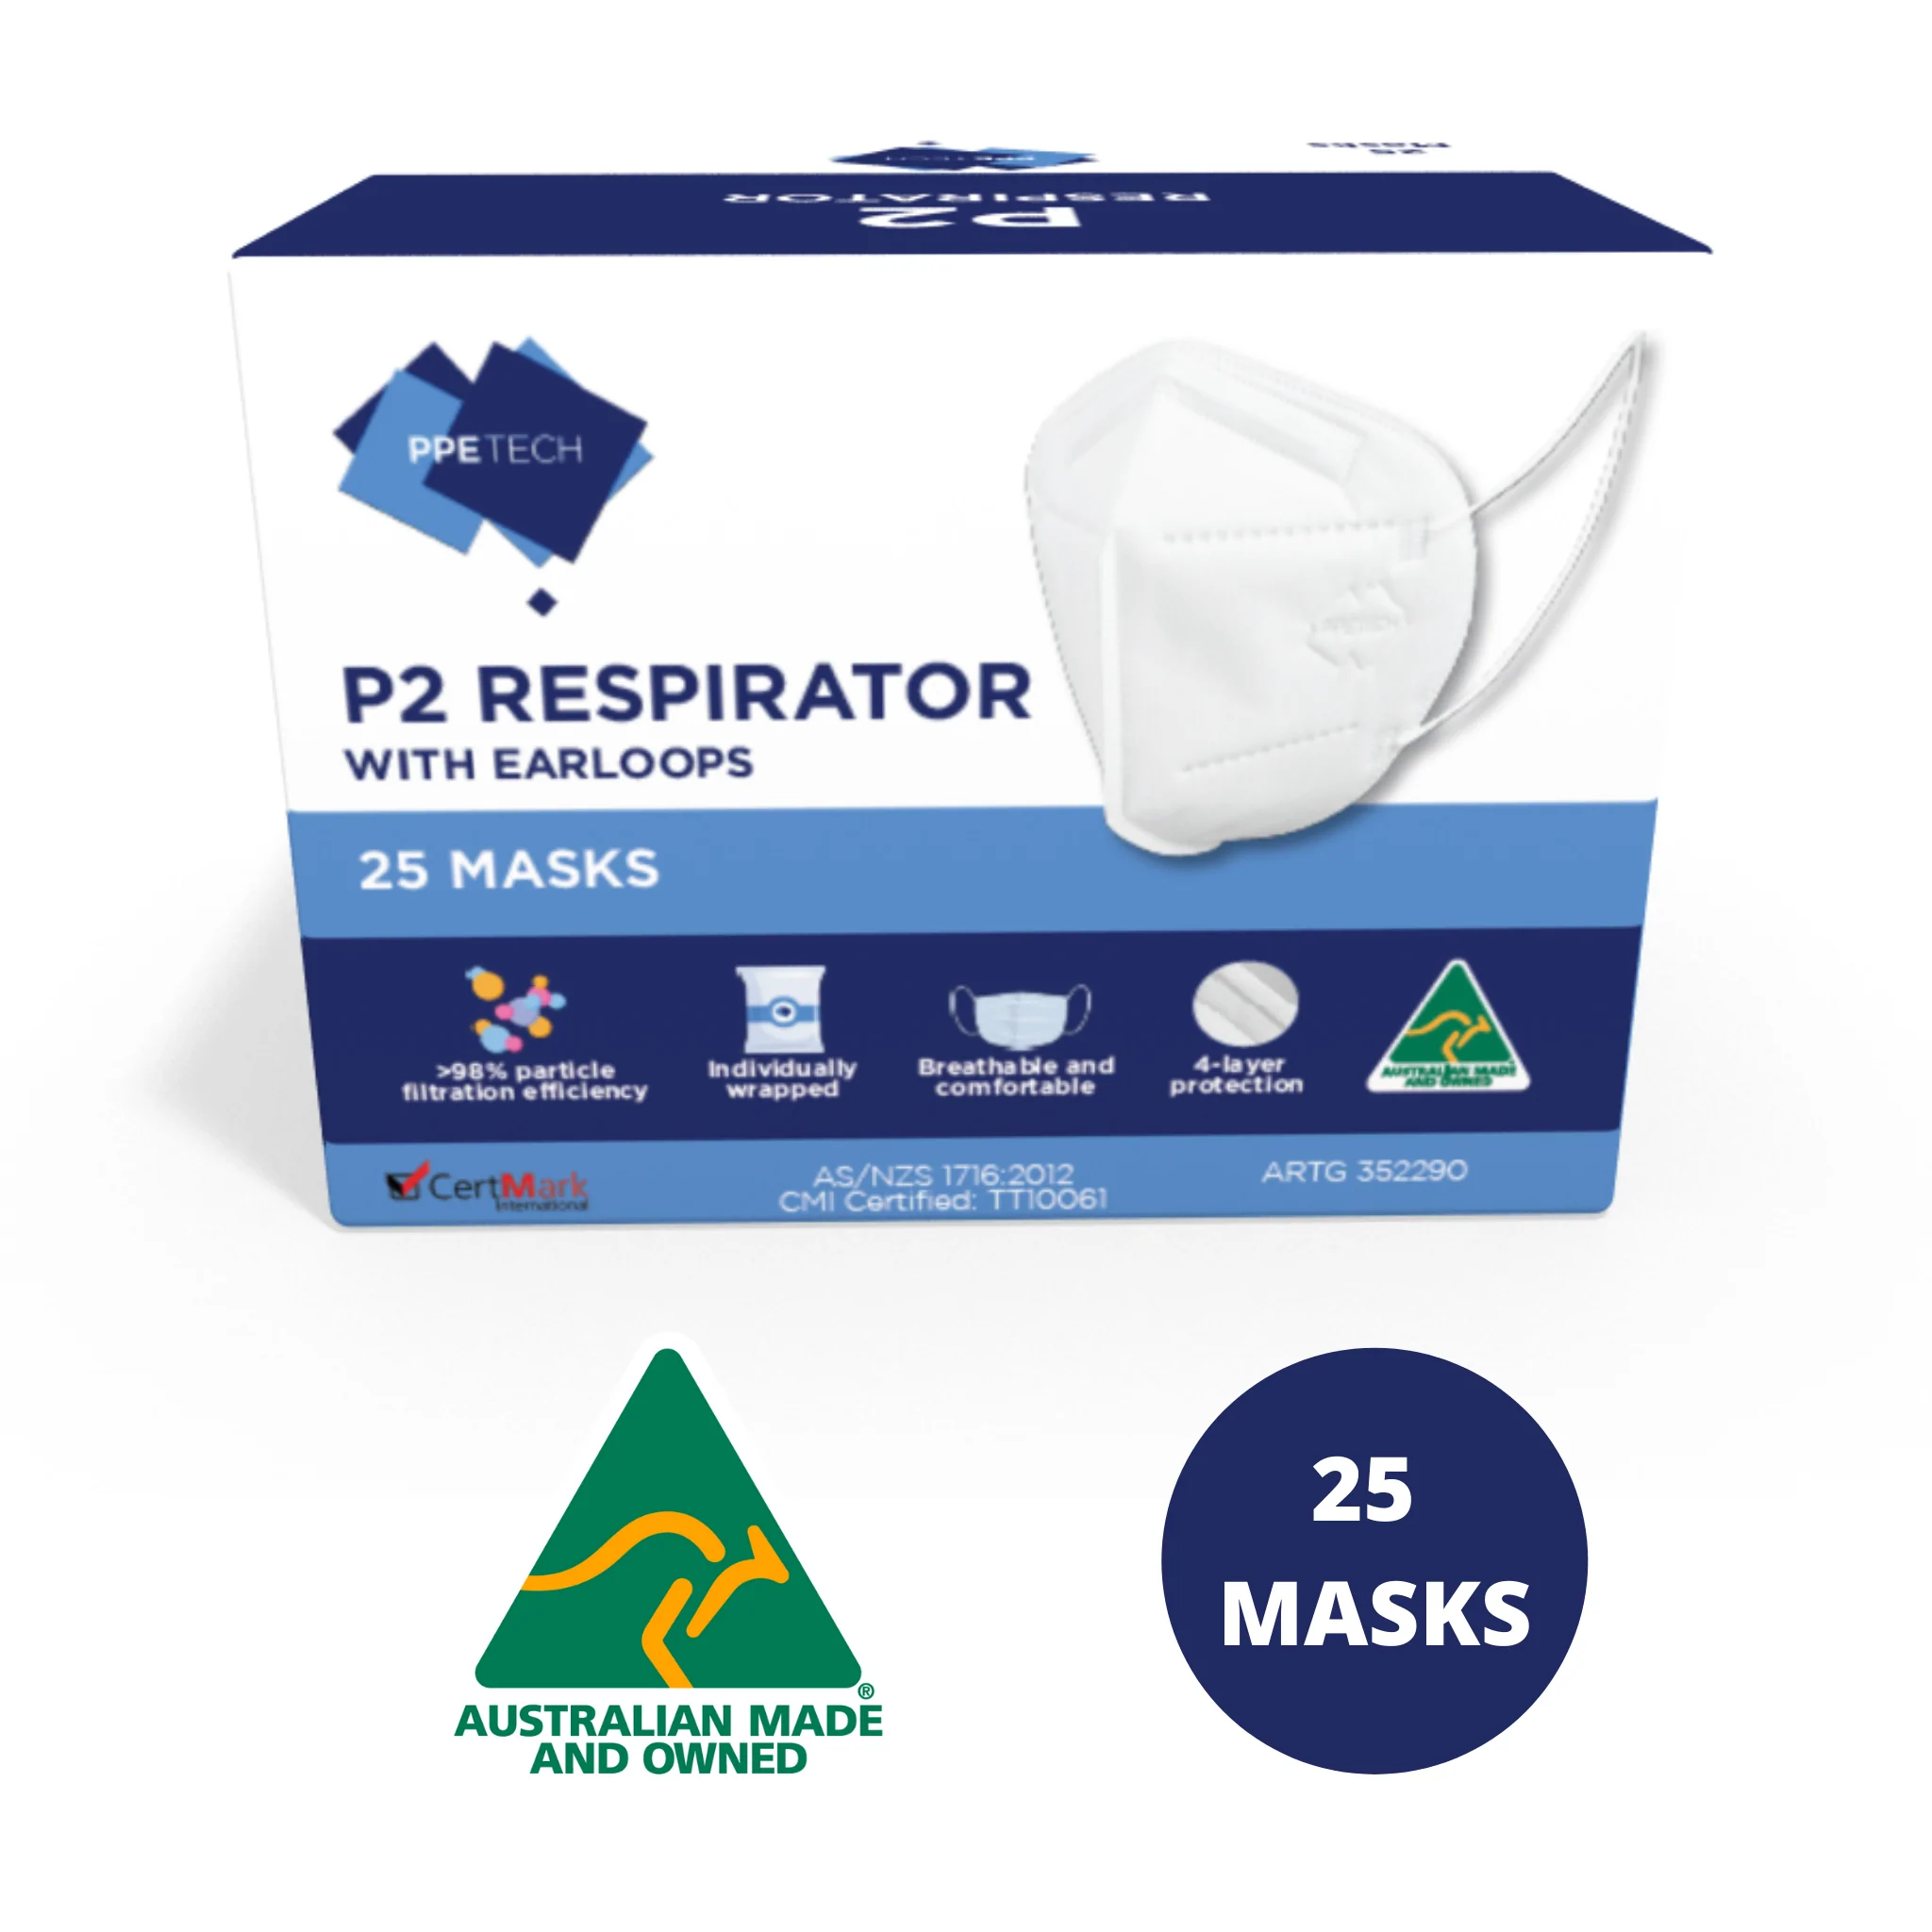 Mask Disposable P2/N95 - PPETECH Box of 25